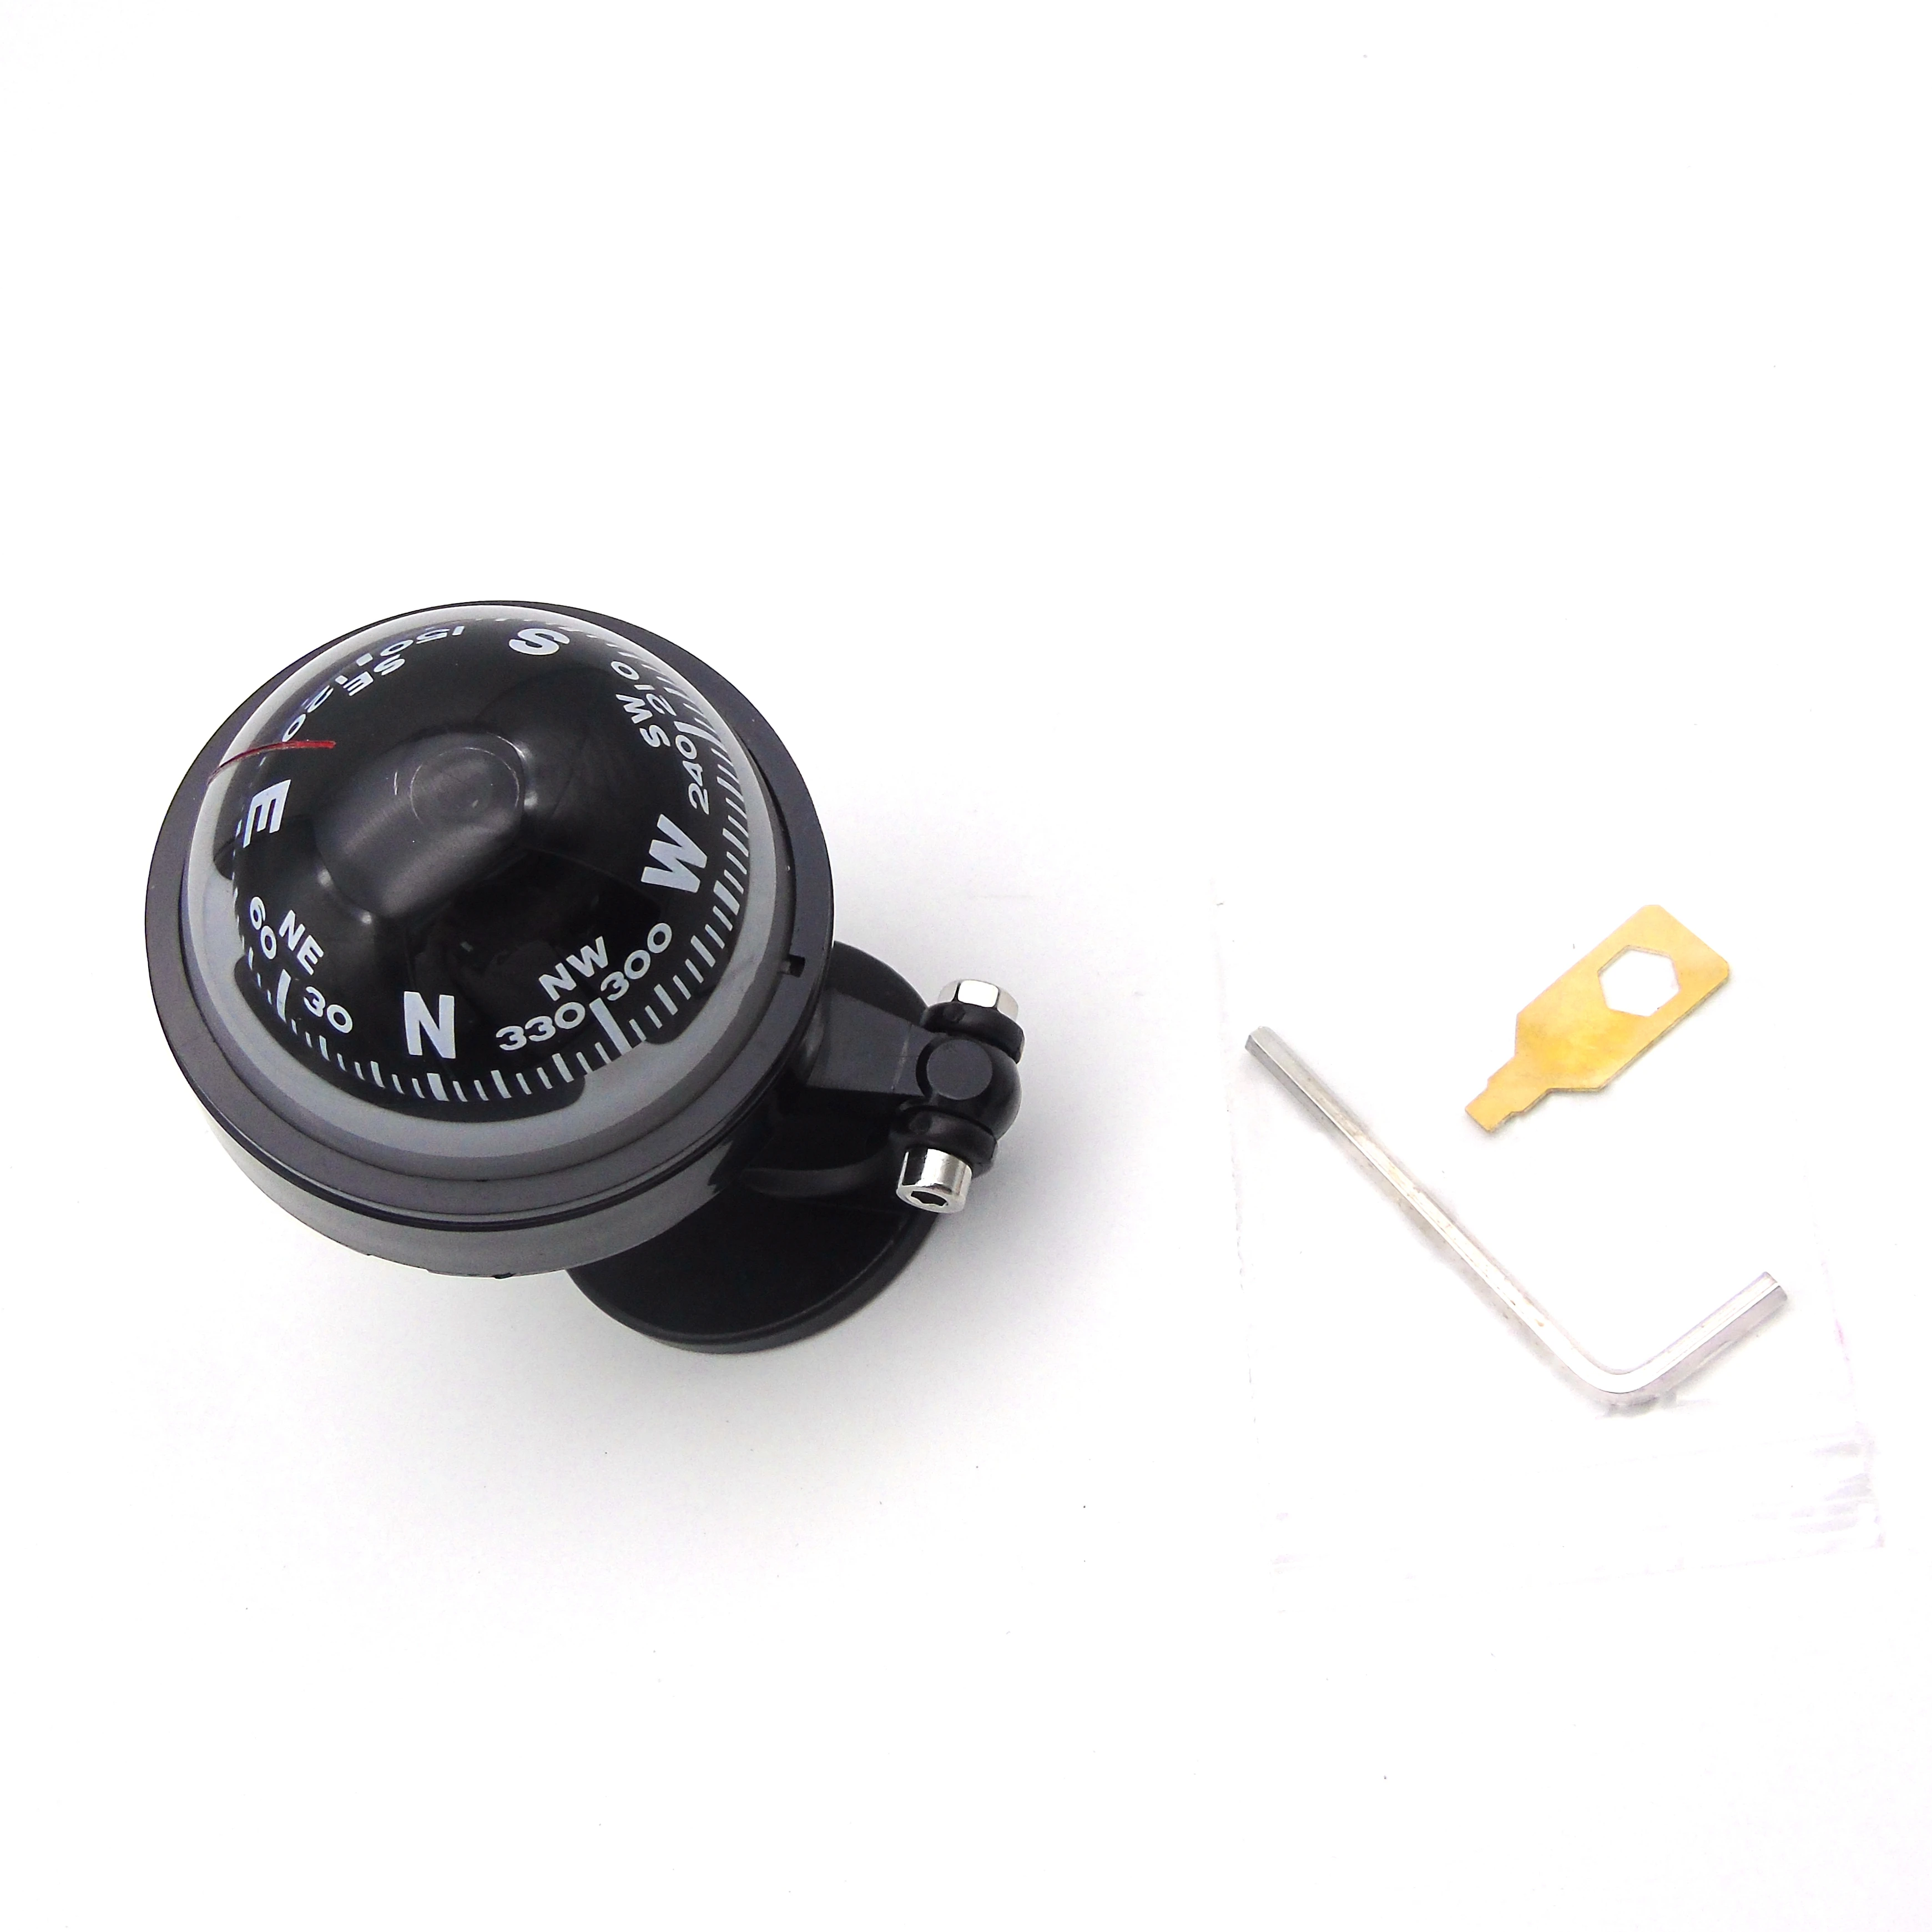 Travelling Boat Compass Vehicle Compass Navigation Direction Pointing Mini Guide Ball,Suitable for Car or Cycling Truck Boat 